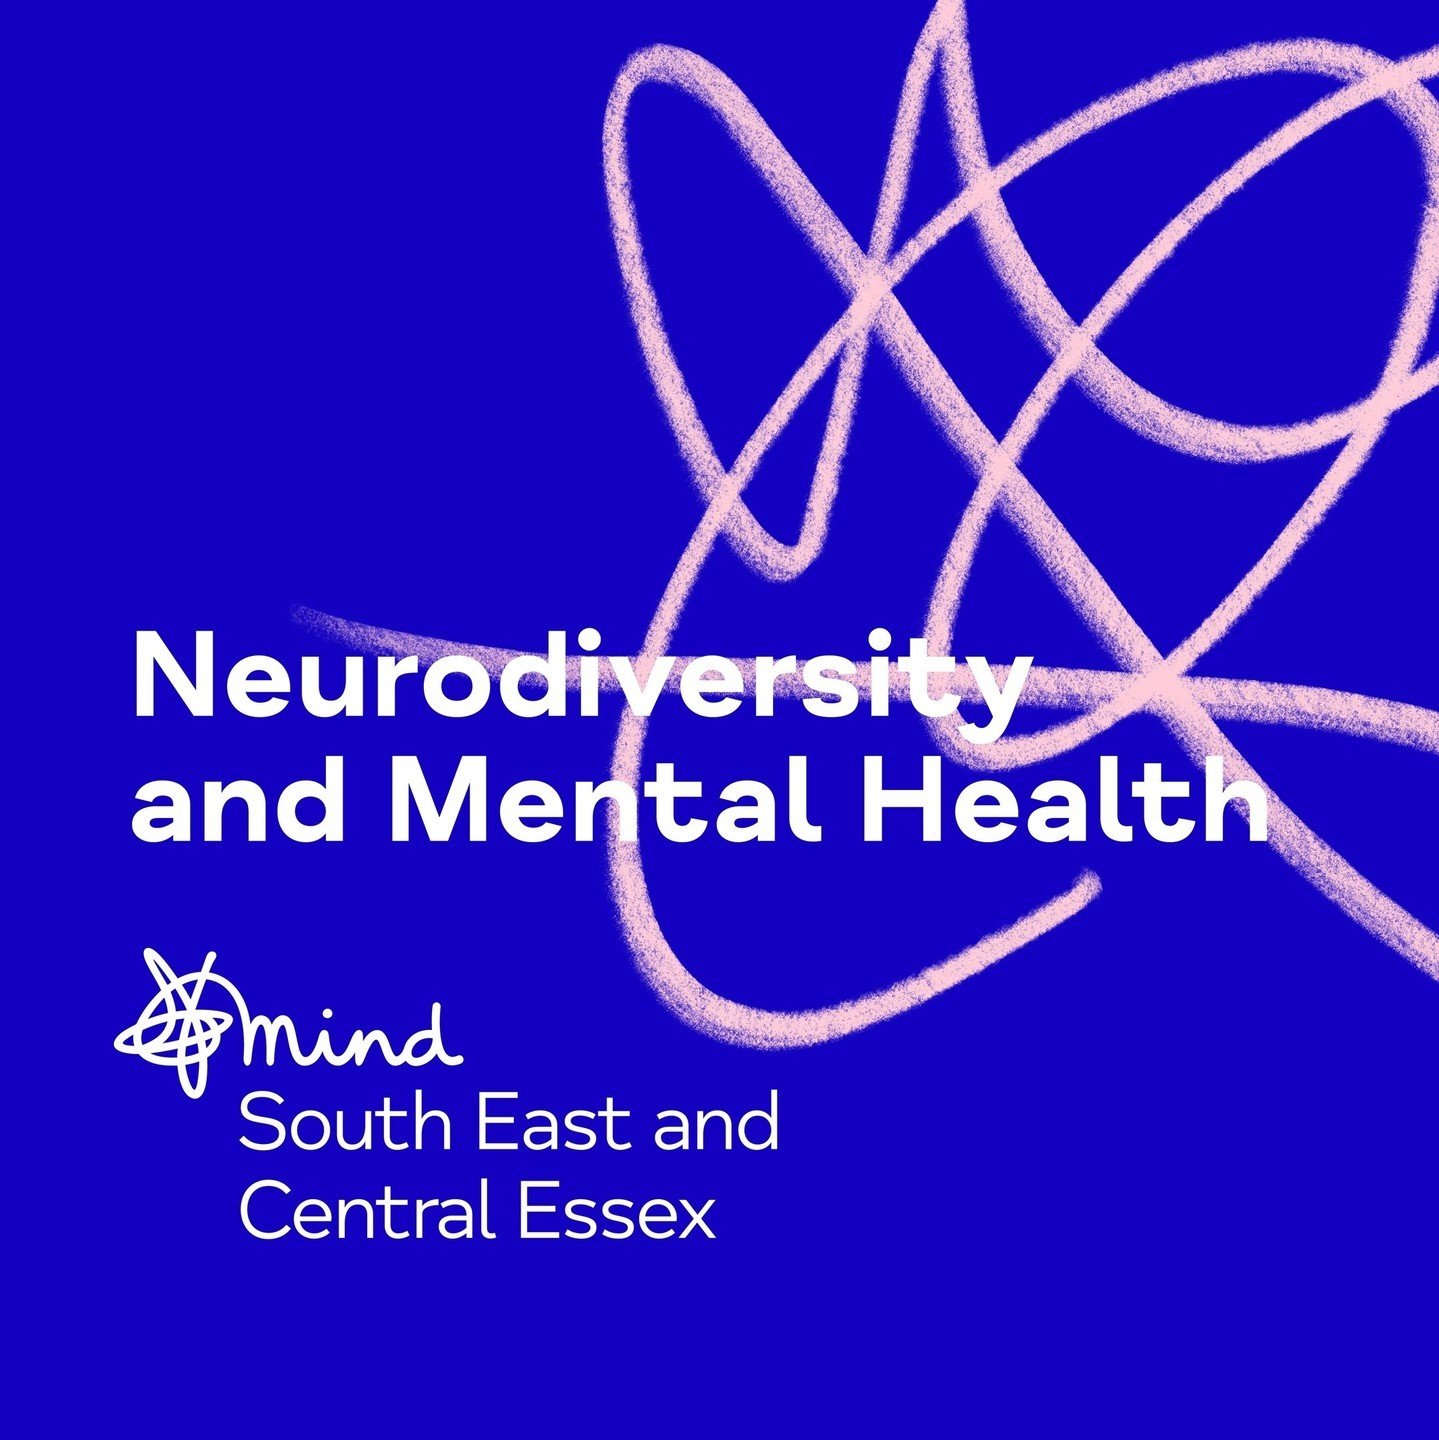 #NeurodiversityCelebrationWeek is an opportunity to celebrate the special gifts being Neurodiverse brings to our communities and relationships, especially the strengths our neurodiverse colleagues bring to the workplace.⁠
⁠
Here at @sece_mind we stri